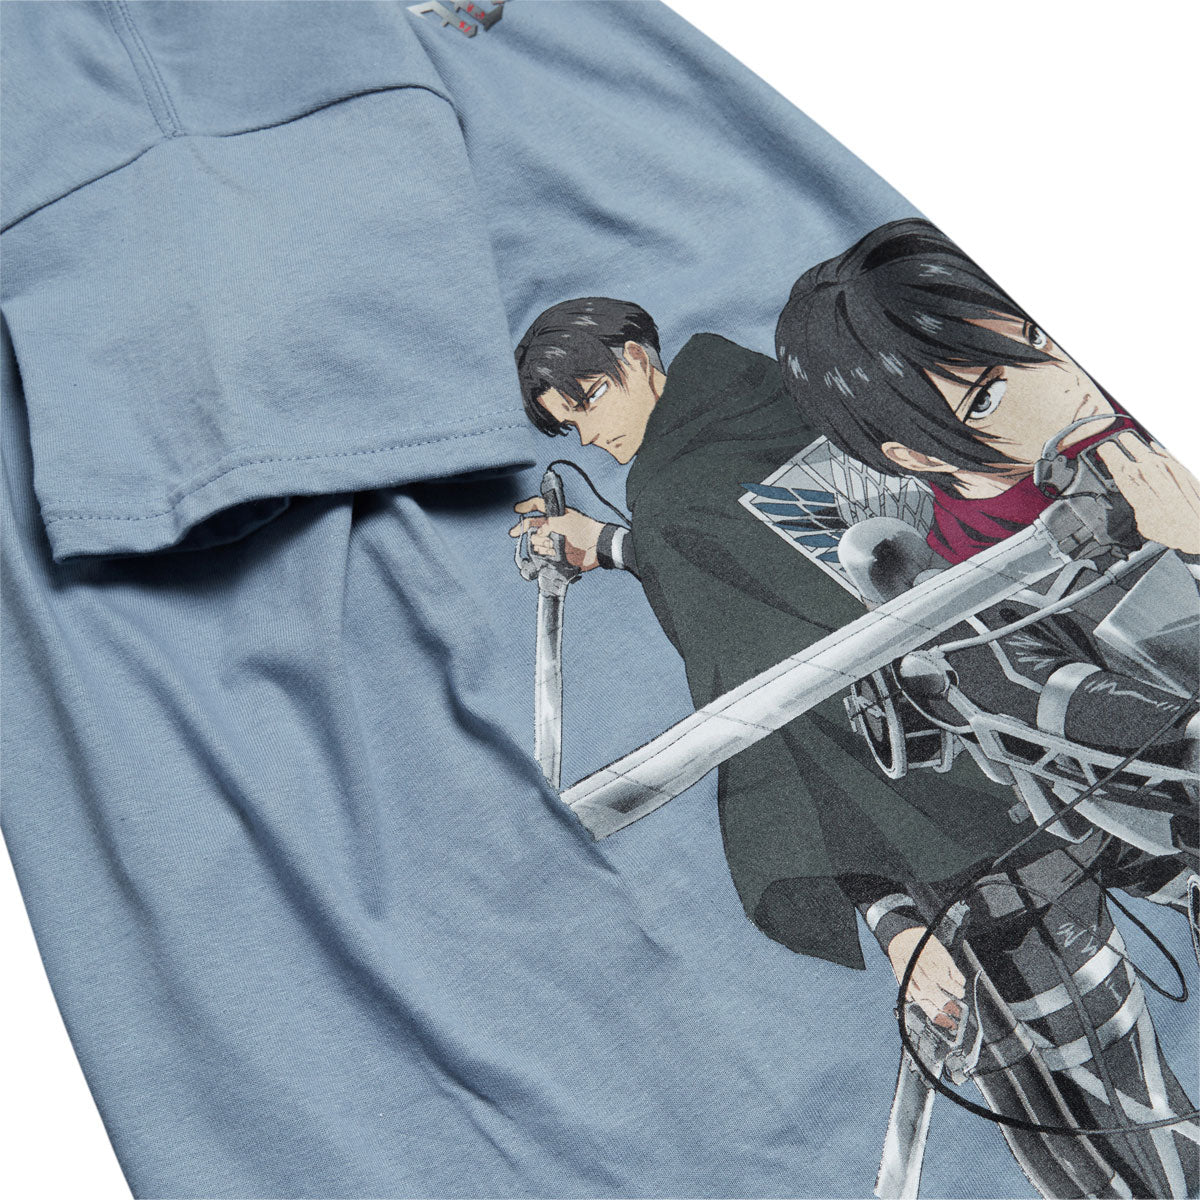 Color Bars x Attack on Titan Back to Back T-Shirt - Stone Blue image 2